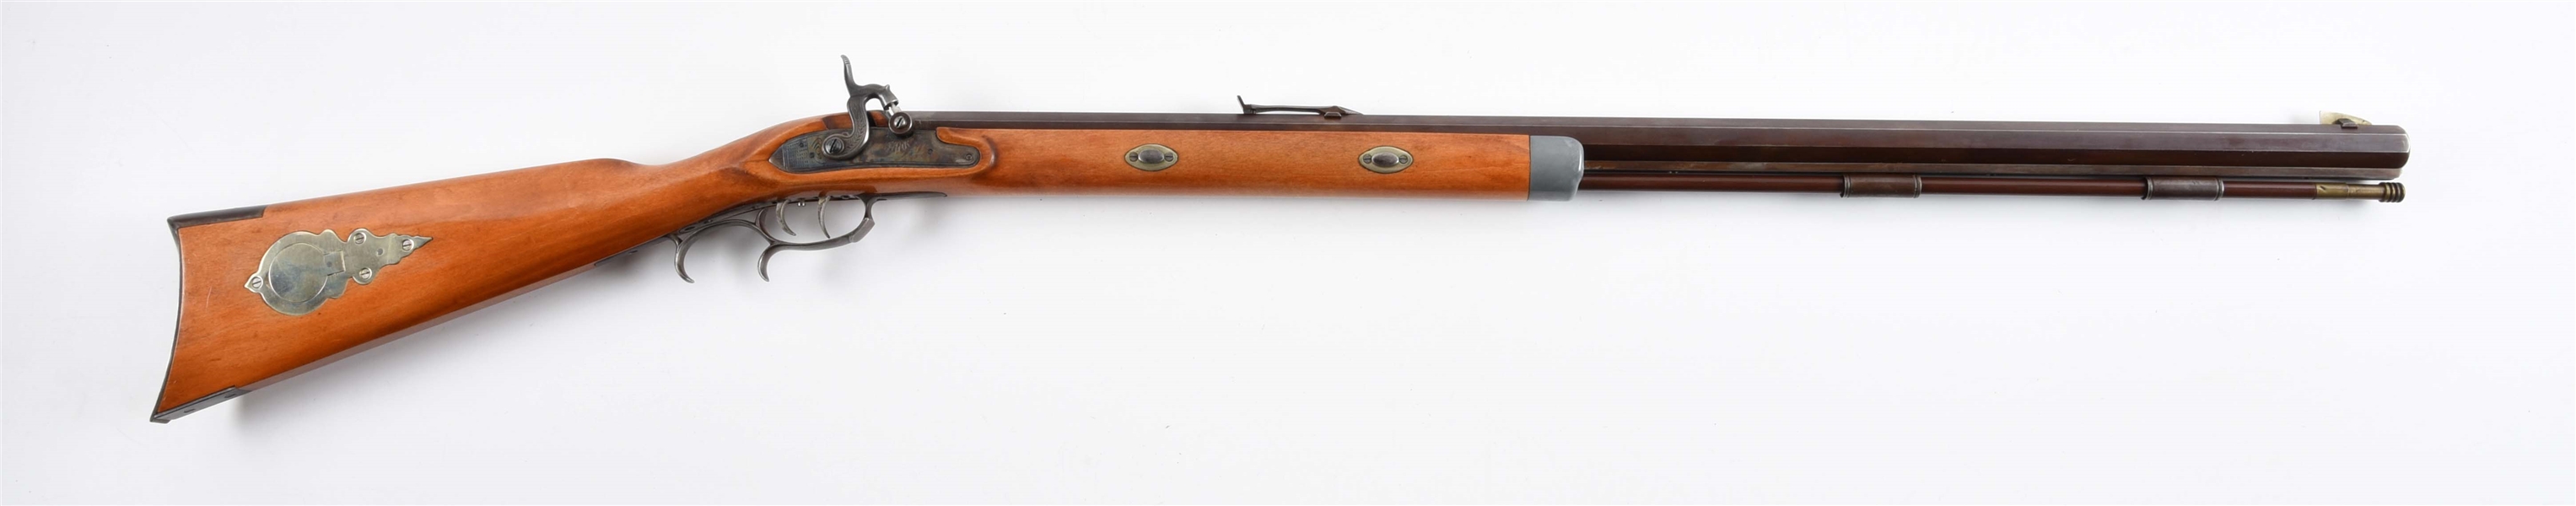 (A) CONNECTICUT VALLEY ARMS KENTUCKY PERCUSSION RIFLE.